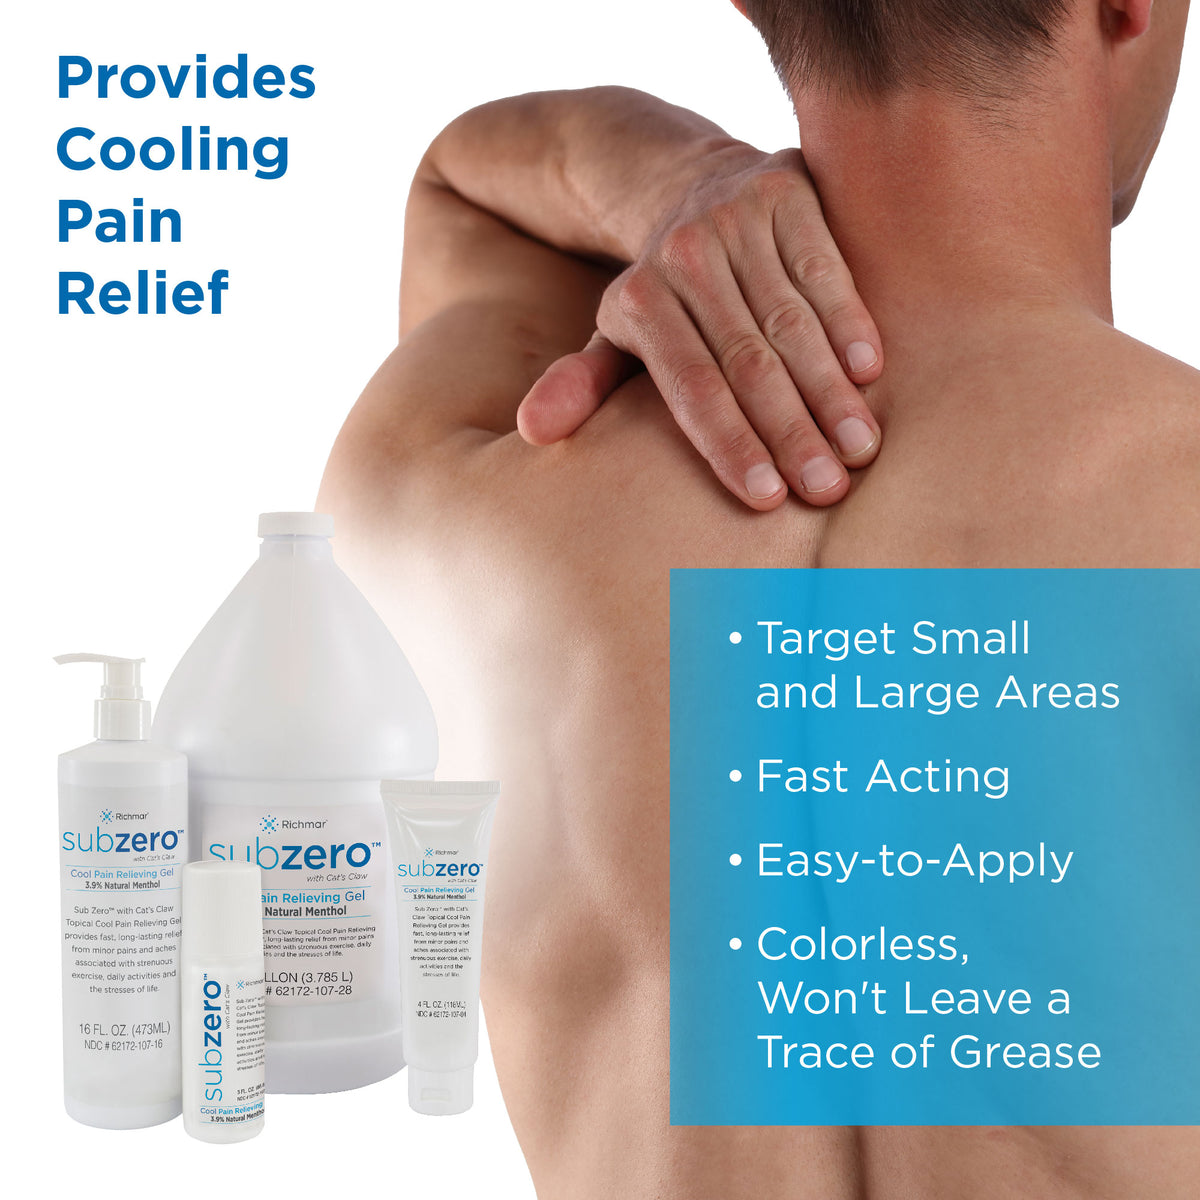 Sub Zero bottles next to a man holding his back in pain : Further details are provided below